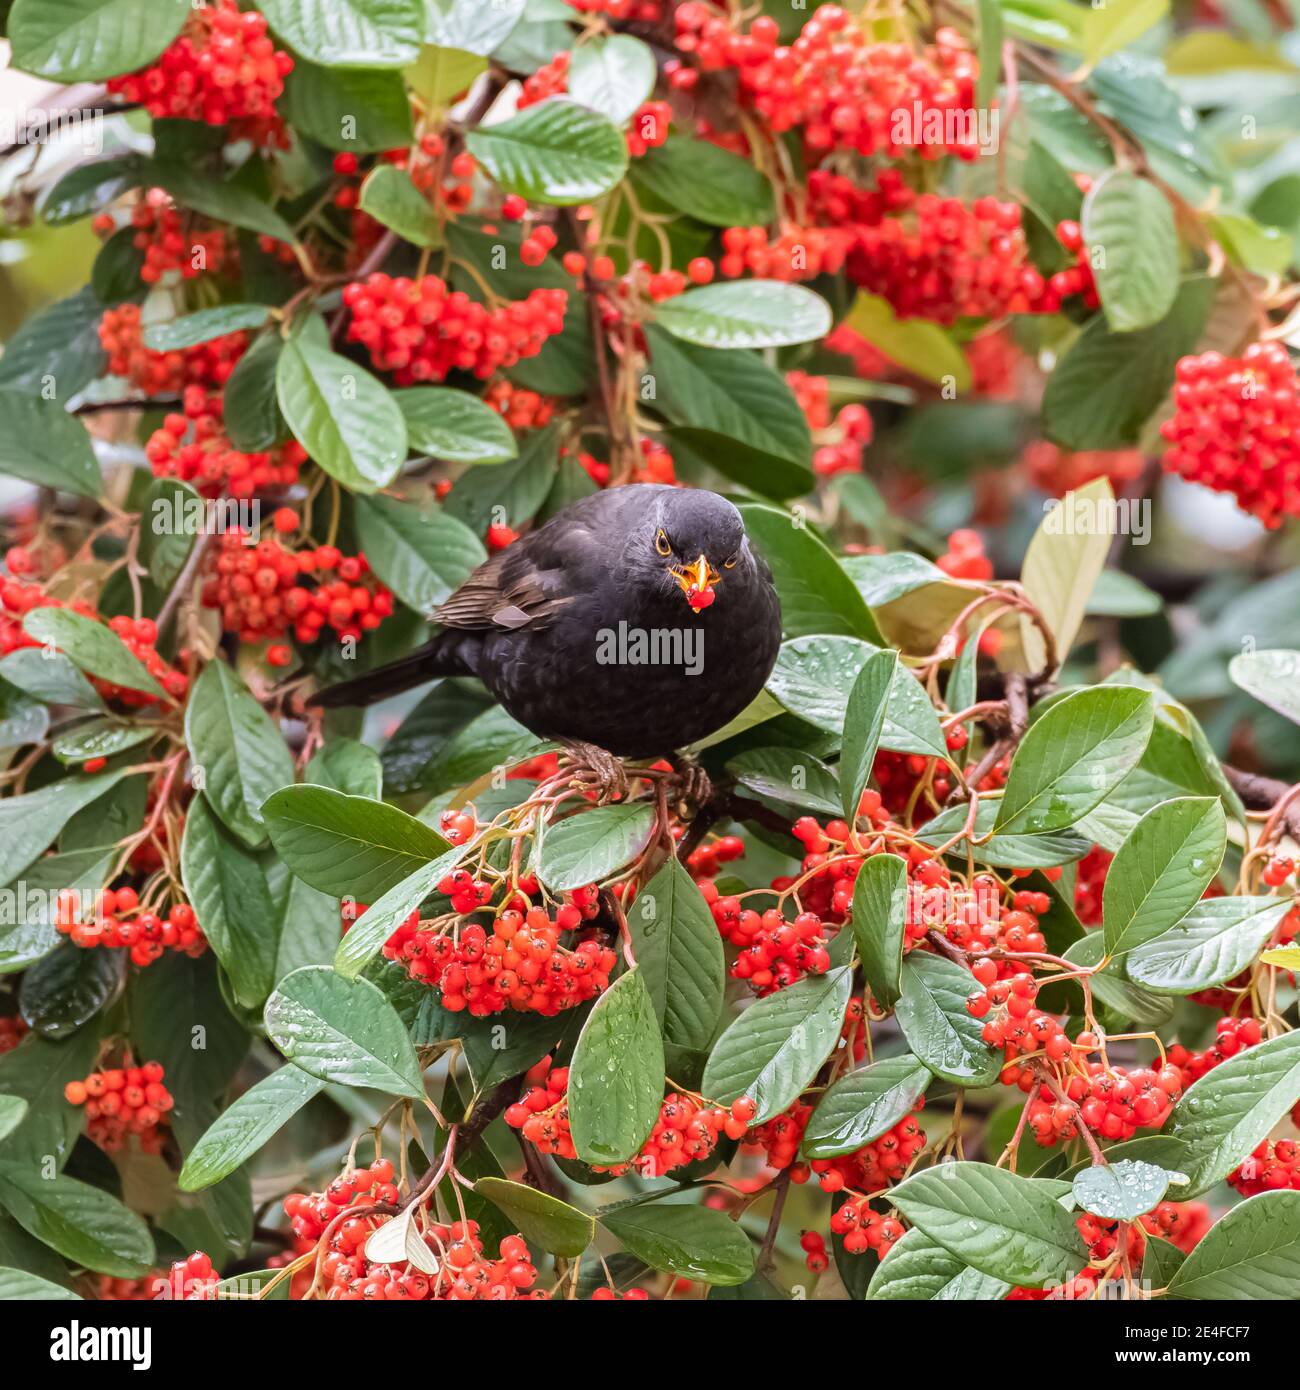 Common blackbird, Turdus merula, eating red seeds in a tree Stock Photo